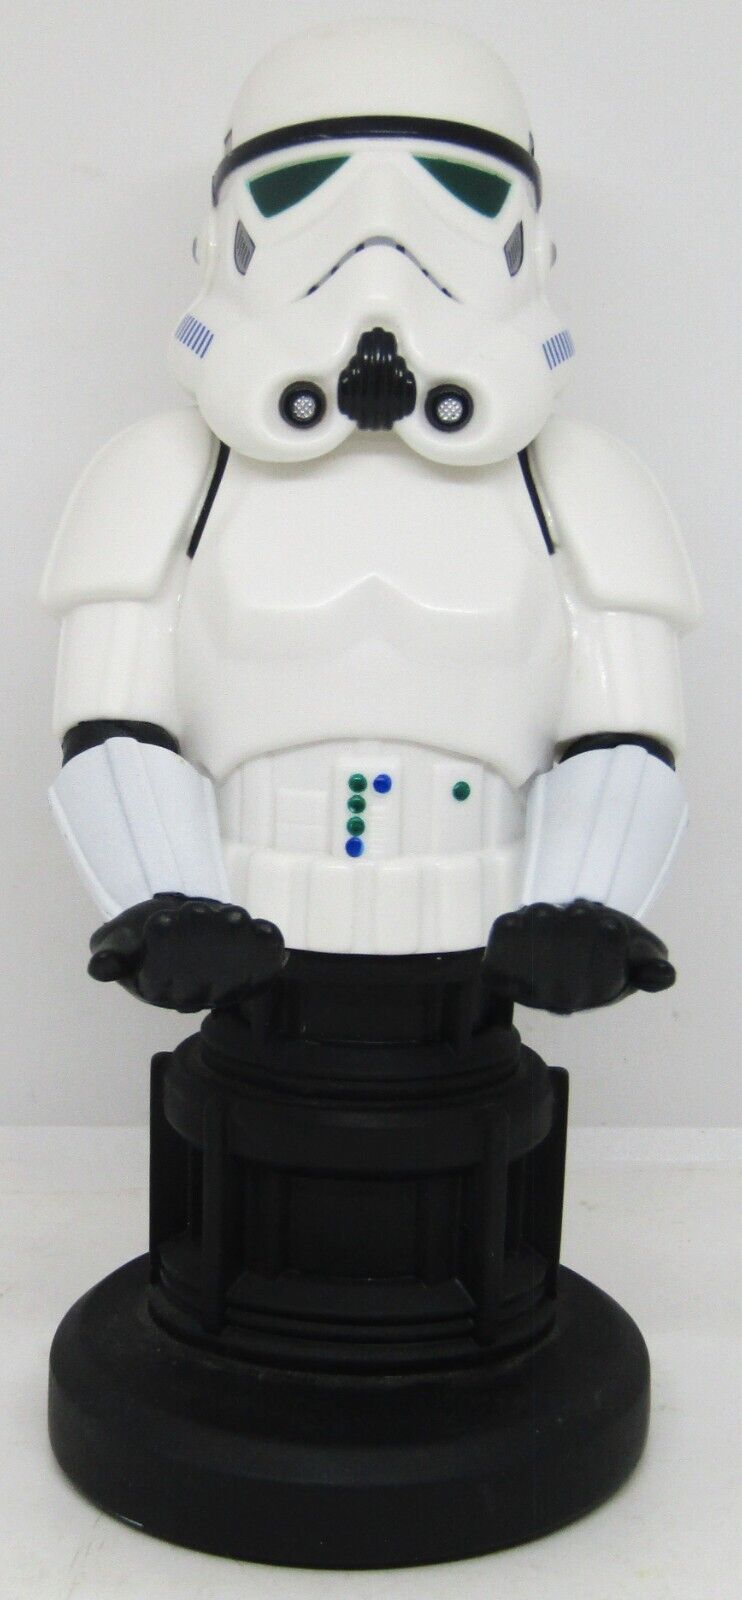 Star Wars Lucas Films Stormtroppers Cell Phone/Remote Holder.